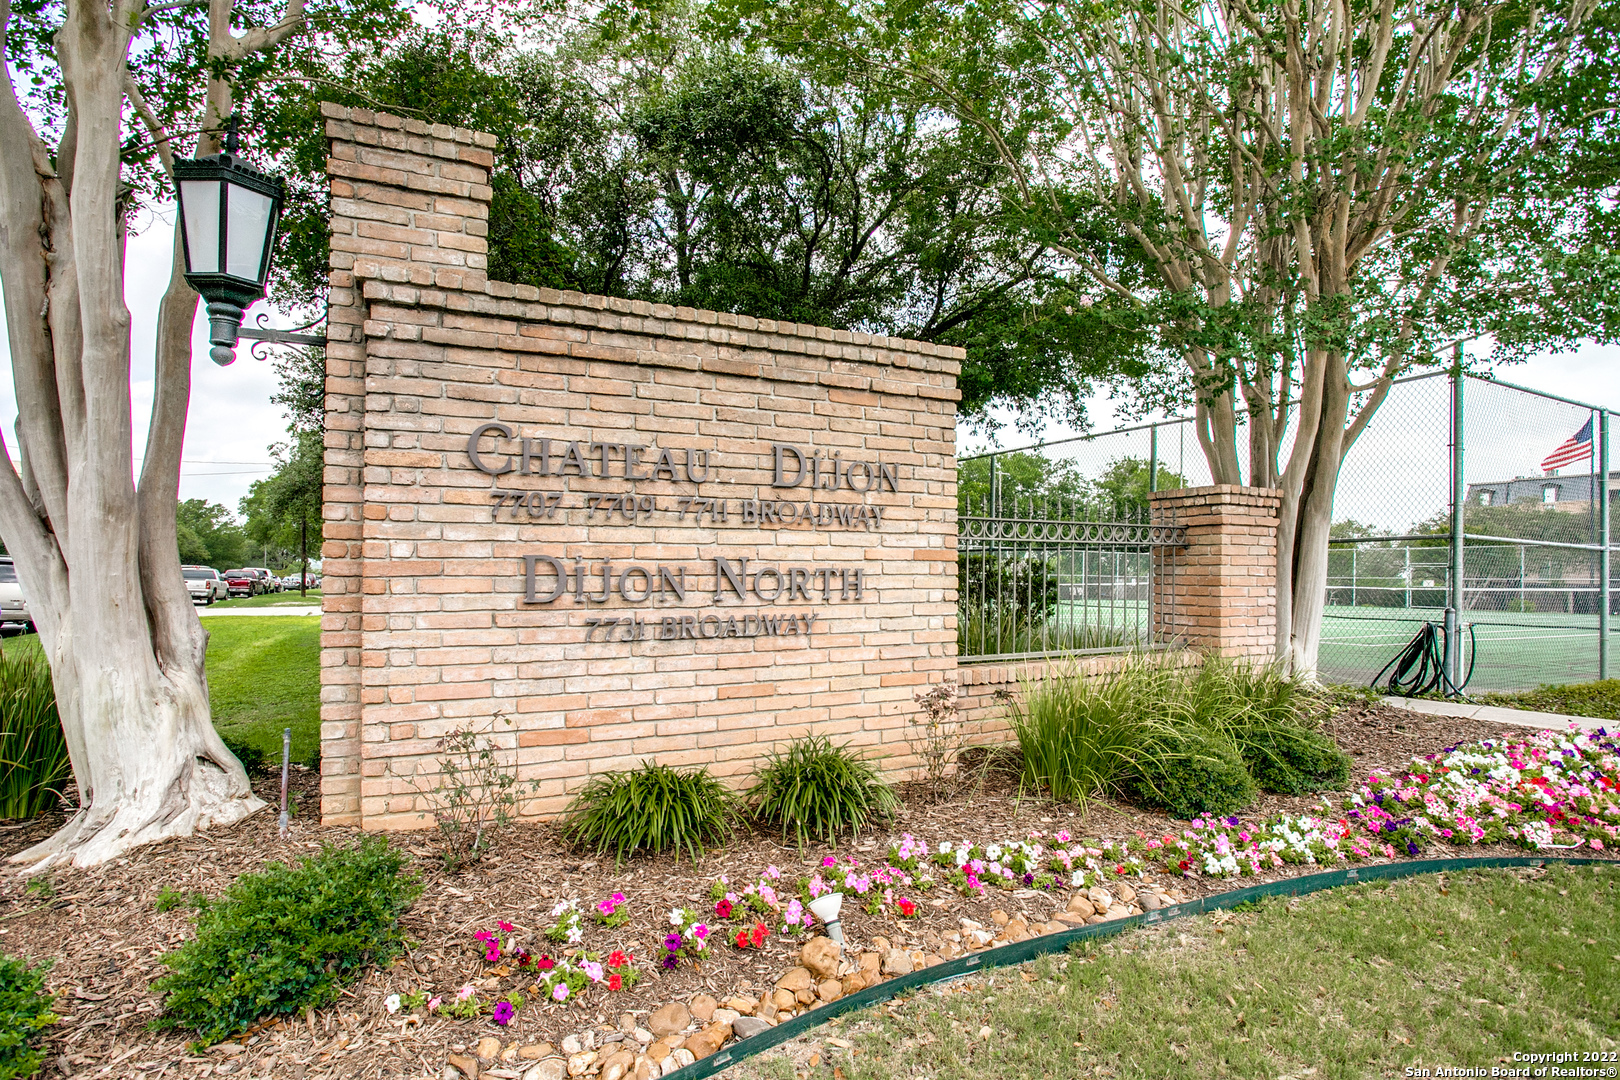 Experience the ultimate in urban living at the prestigious gated community of Chateau Dijon. Resident amenities start with New Orleans style brick buildings, a park like setting with towering oak trees and beautiful manicured landscaping, on-site management, security cameras on property, two resort size pools, tennis courts, dog park and ample guest parking. The pedestrian-friendly lifestyle offers convenient shopping and restaurants venues along the Broadway corridor as well as close proximity to the Pearl District, museums, cultural events downtown, the airport, Fort Sam, Trinity University and the University of Incarnate Word and Loop 410/Hwy 281. This remarkable, renovated condominium home is all on one level. Modern, light and bright, the open living area and kitchen is always ready for your entertaining or relaxation needs. The stunning primary retreat offers a private spa quality bath with granite counters, separate whirlpool tub and large walk-in shower, dual vanities and oversized walk-in closet plus a sitting area. The guest bedrooms each have an en-suite bath. Interior features include a refurbished gourmet island kitchen with granite counters and high end SubZero and Bosch appliances, upgraded guest baths, enhanced lighting, hardwood floors, coffee or wet bar, utility room with tremendous storage, updated wiring, recently replaced HVAC units and addition of double pane windows. Easy access by elevator or stairs to accommodate residents or guests on this second floor unit. Expansive, private balcony offers peaceful courtyard views. Three car reserved covered parking with exterior storage.